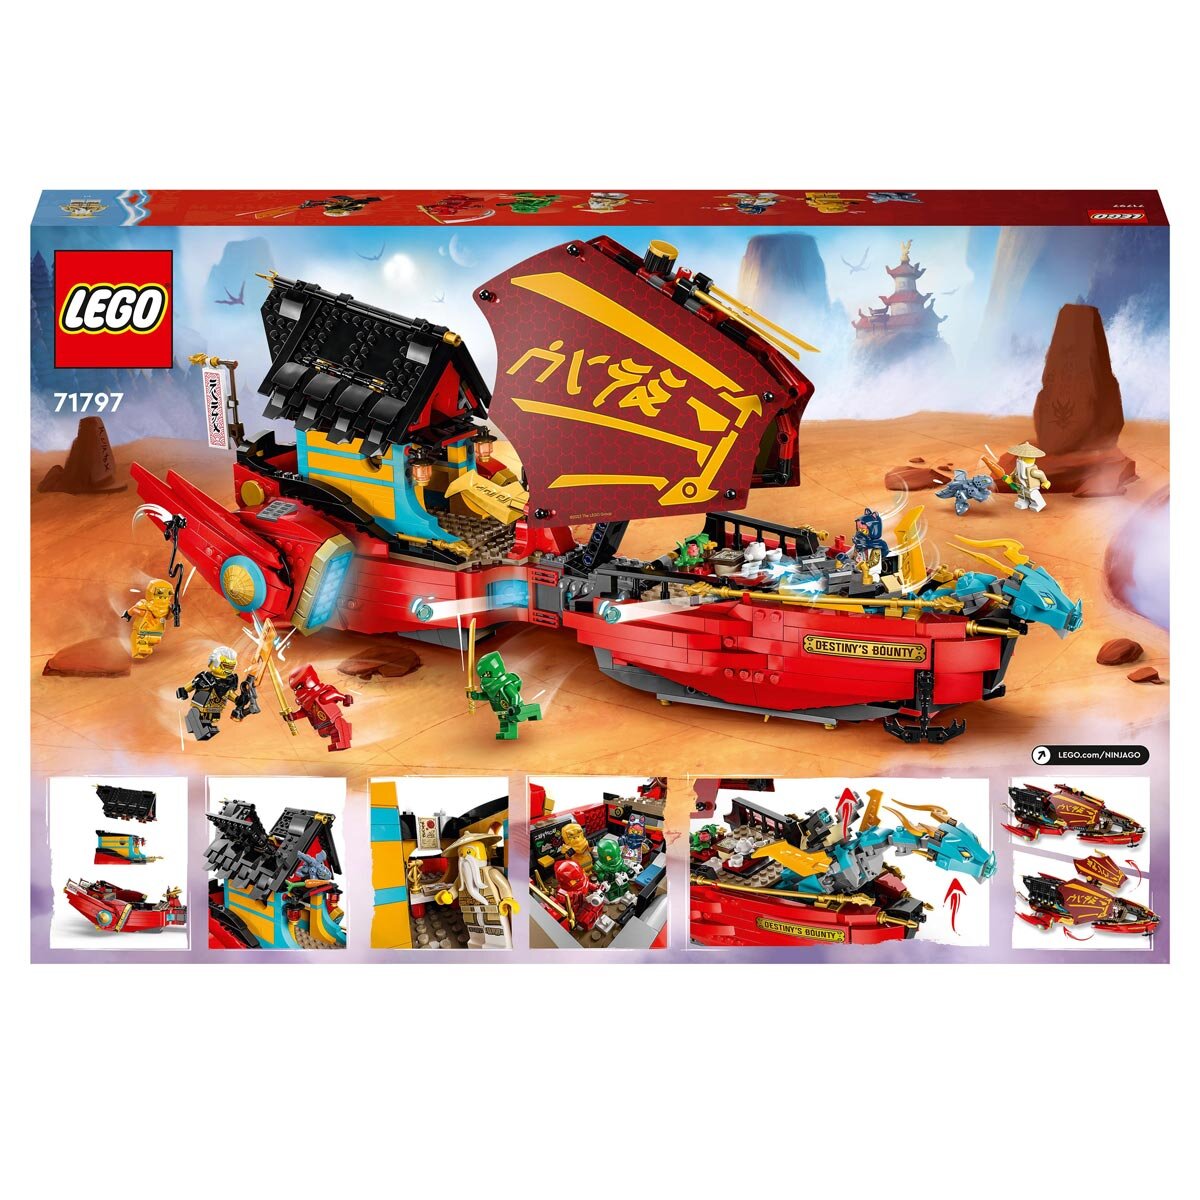 Buy LEGO Destiny's Bounty - race against time Back of Box Image at Costco.co.uk